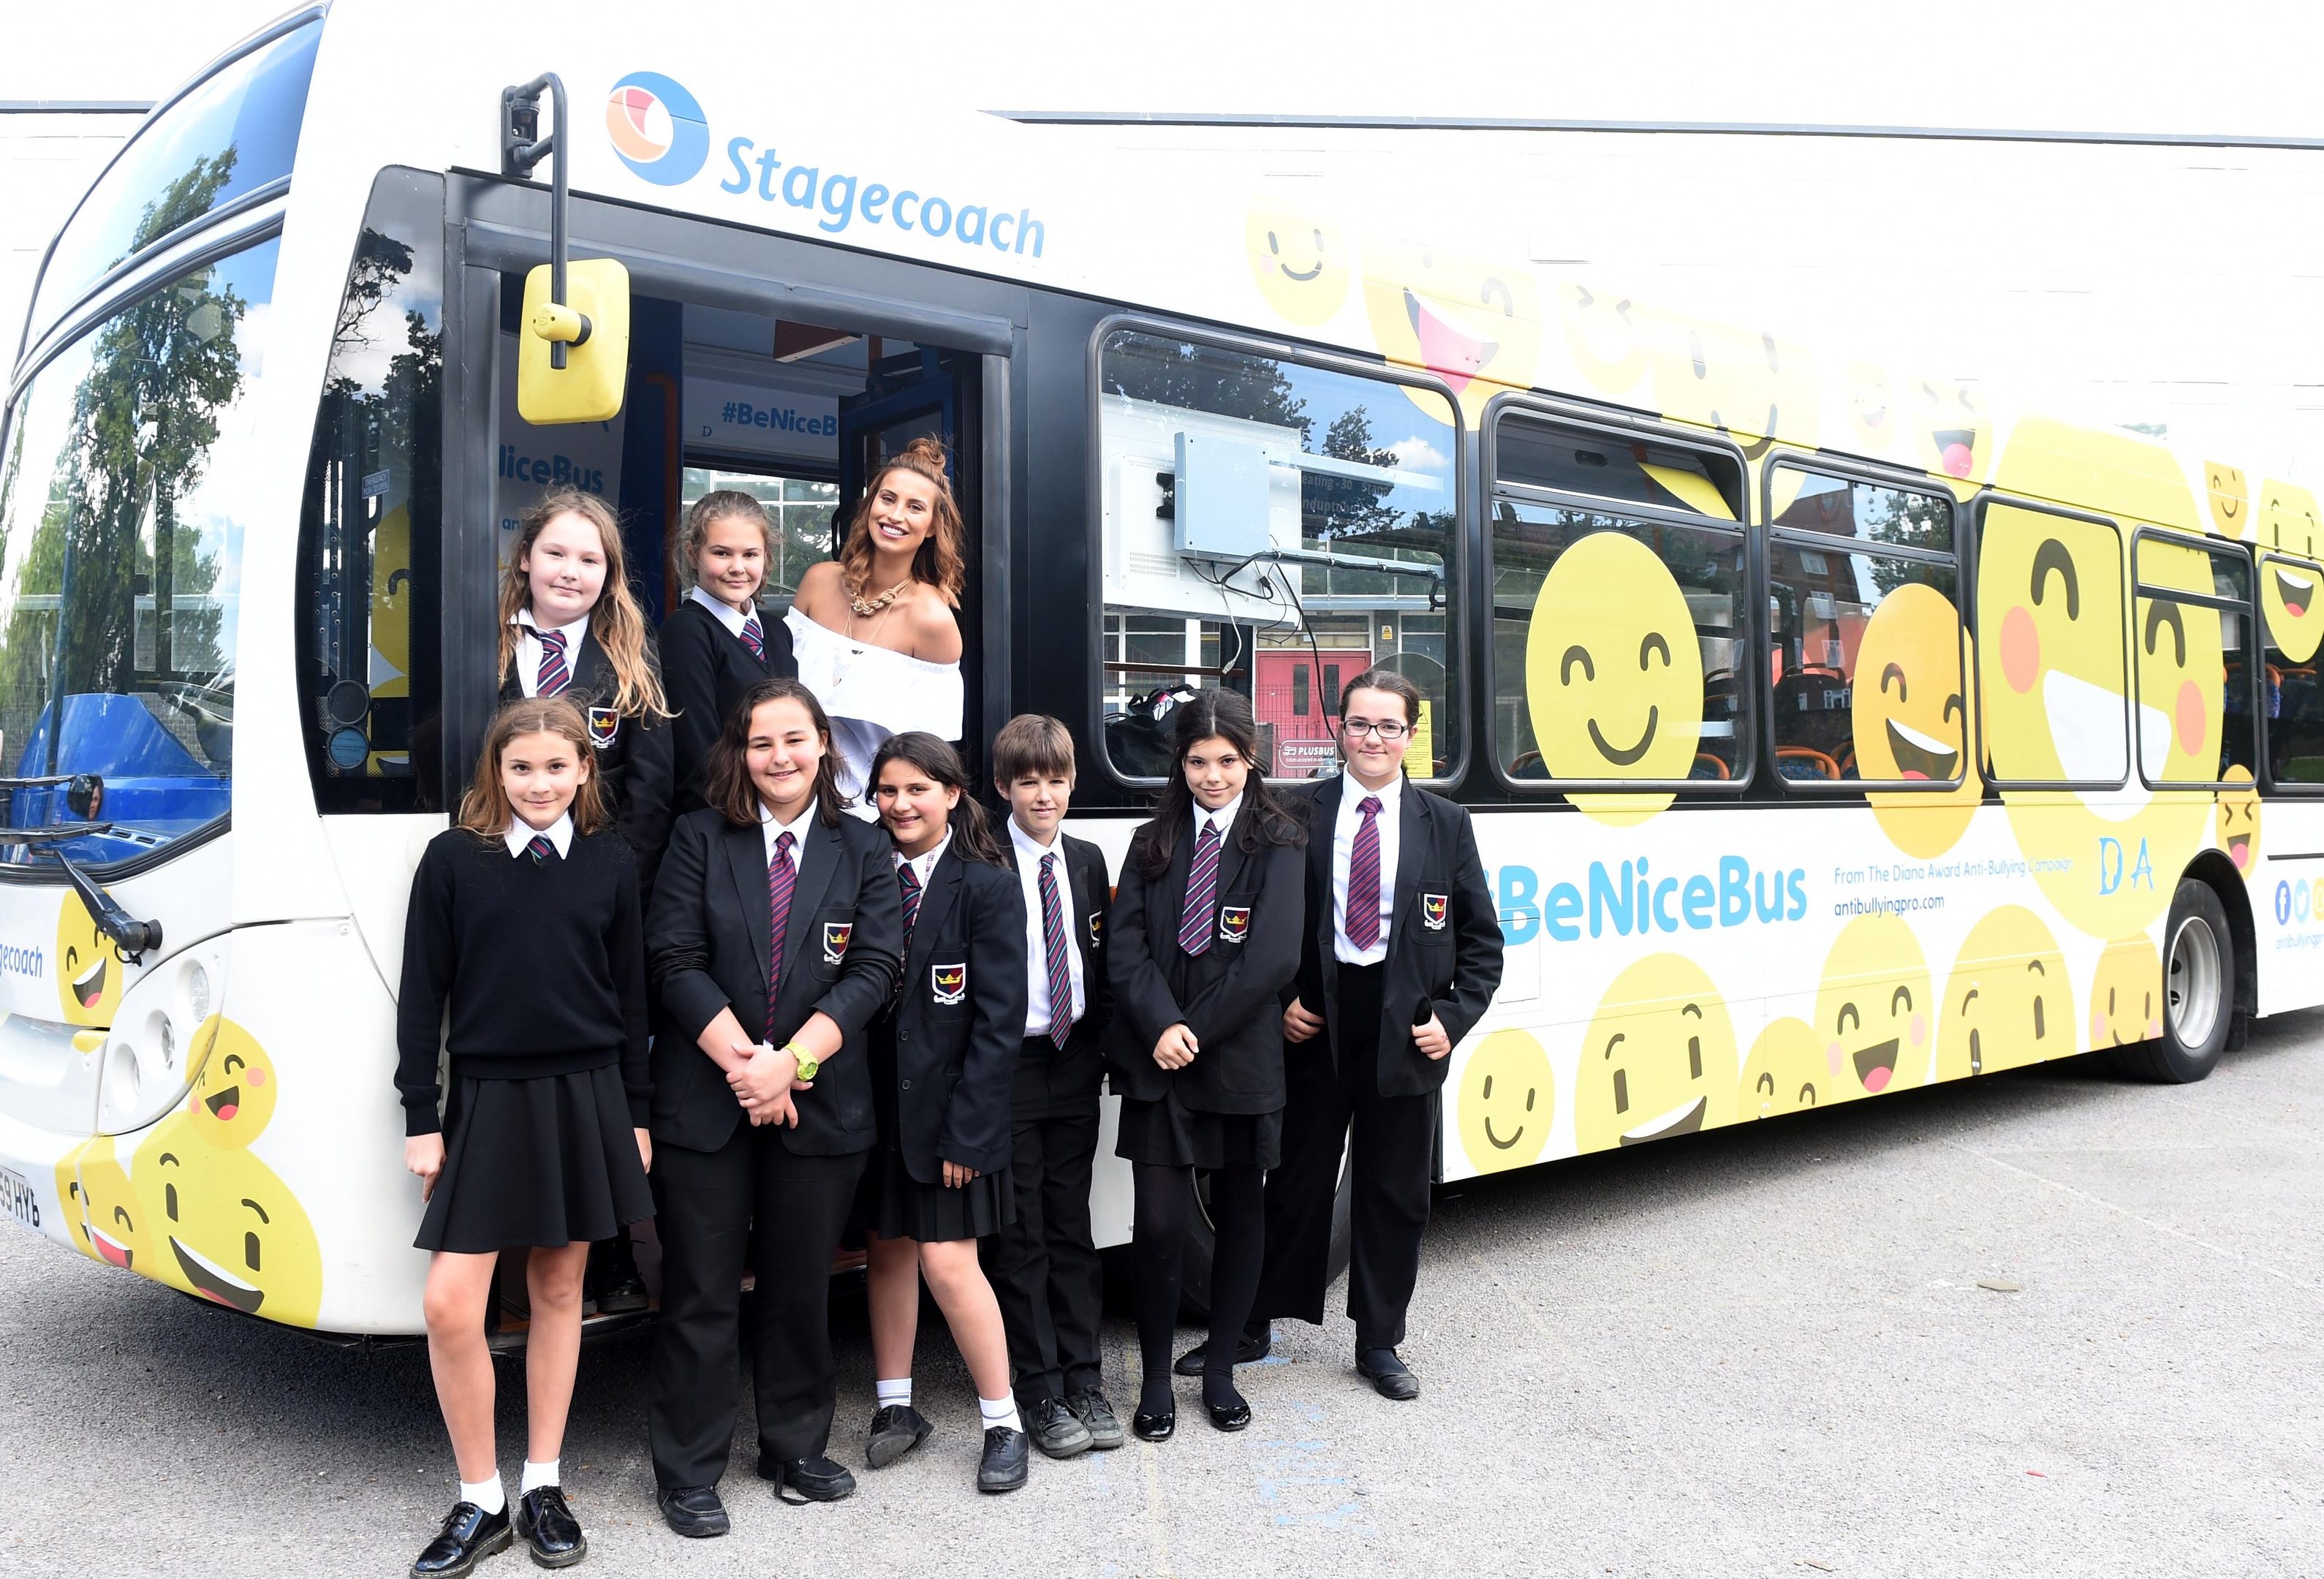 The launch of the UK’s first and only anti-bullying #BeNiceBus with The Diana Award and Stagecoach, held at Kingsdale Foundation School, Alleyn Park, London.
TV presenter  Ferne McCann is pictured with teenagers